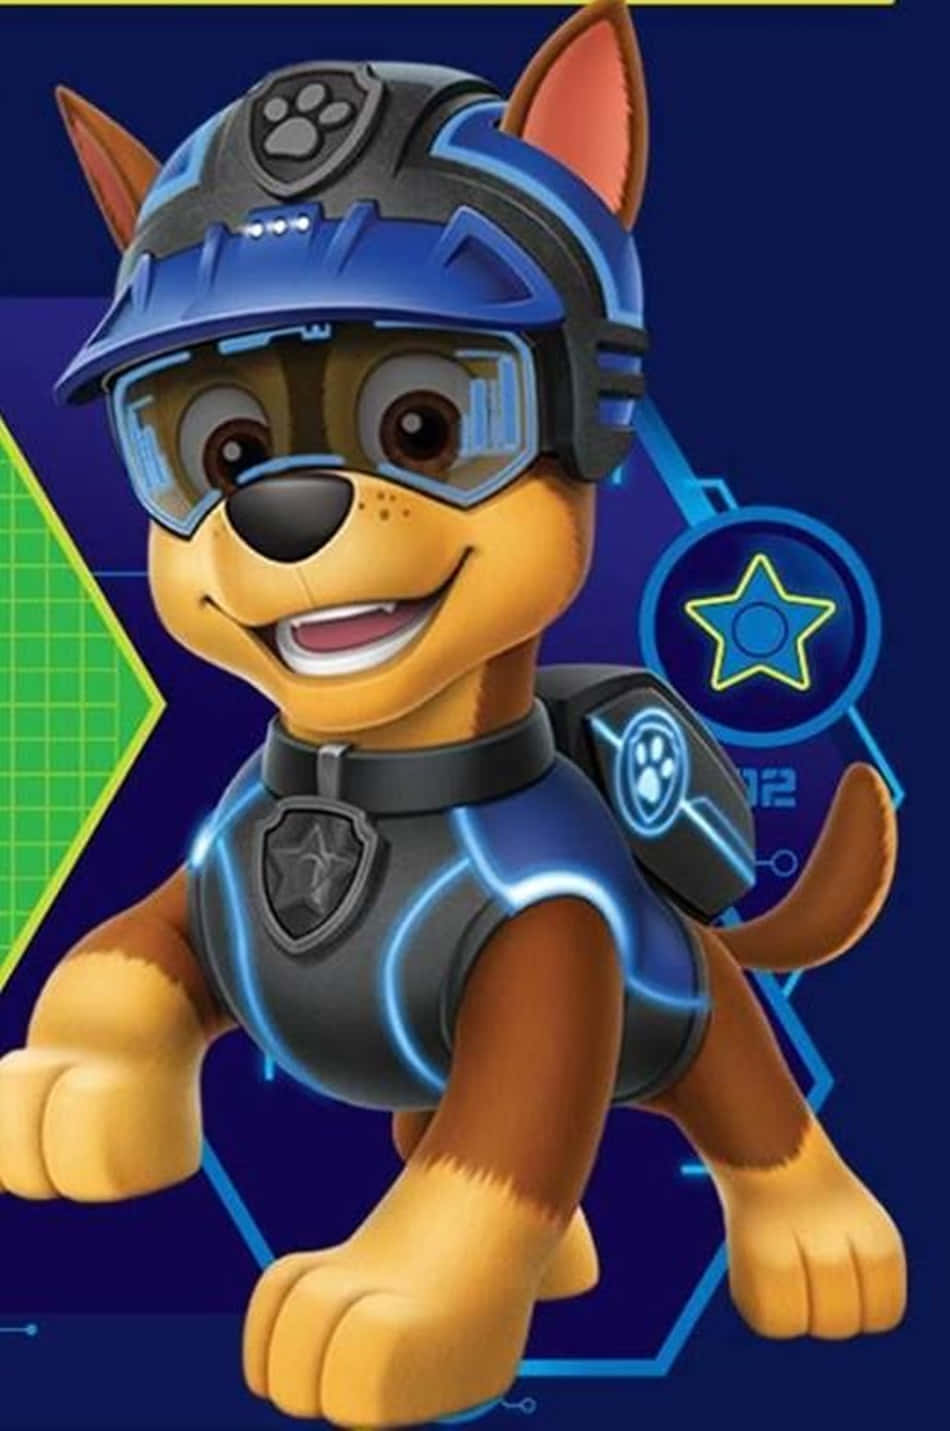 Join Chase the Police Dog on the Paw Patrol Adventure! Wallpaper